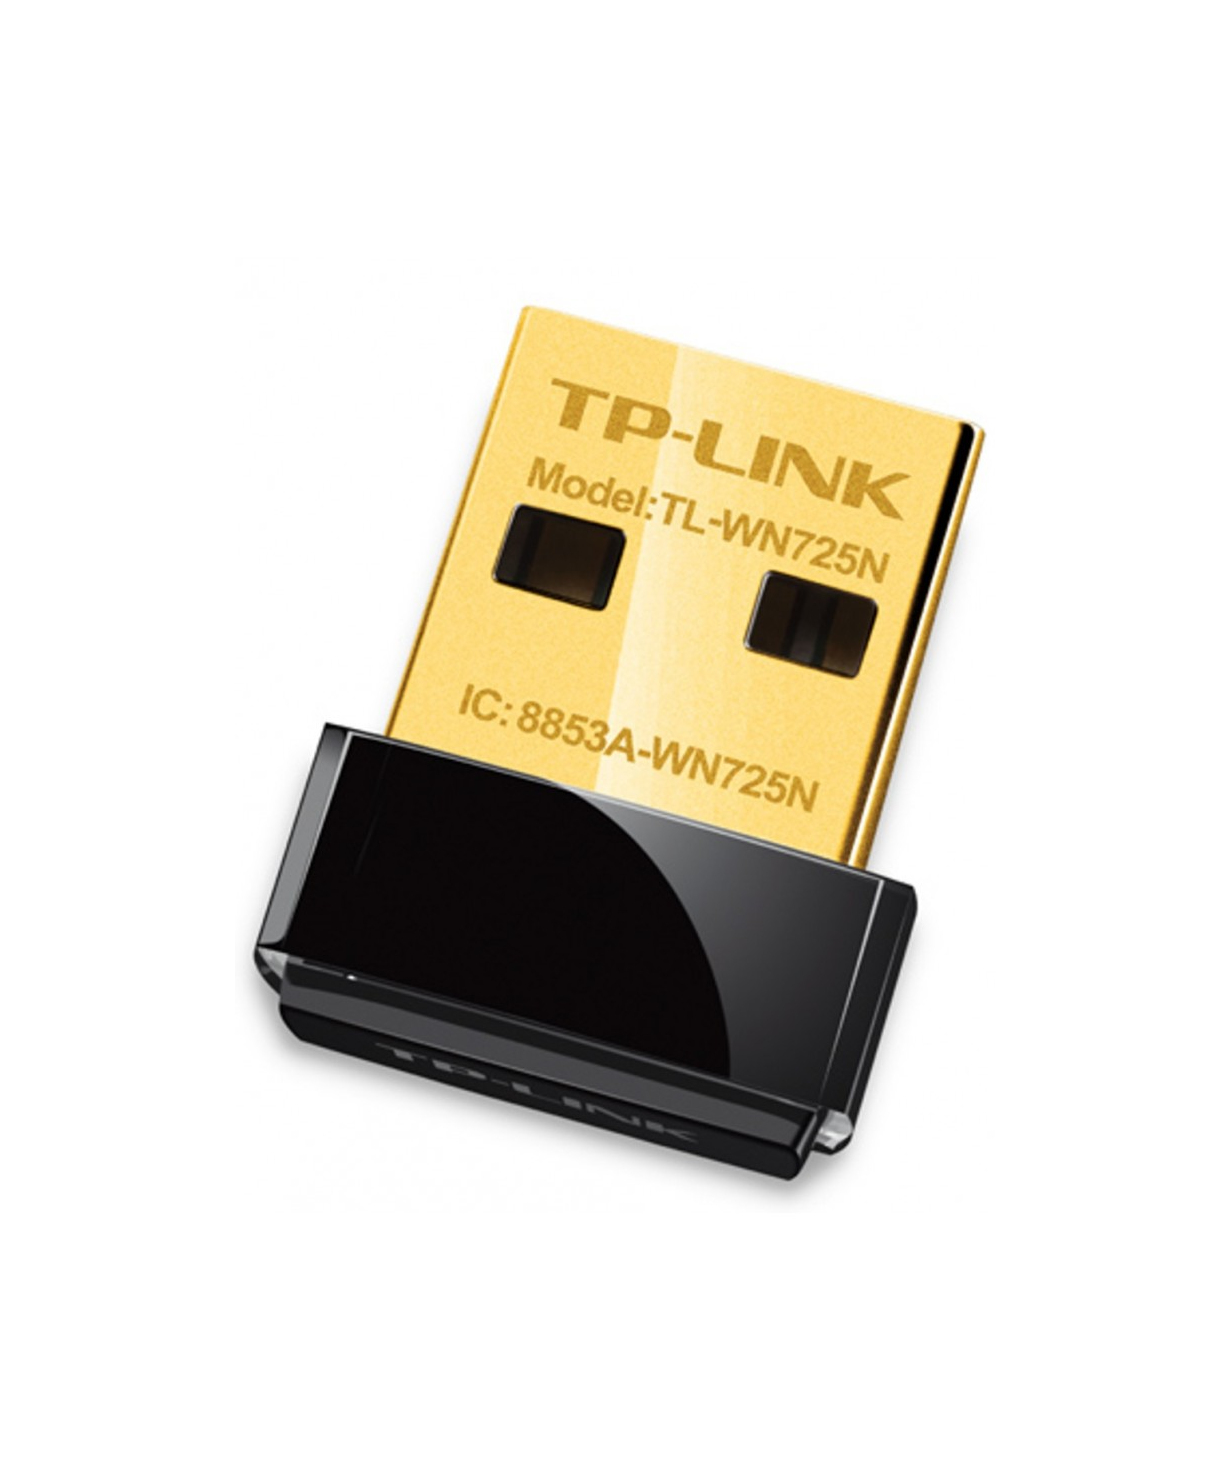 WIFI receiver `TP-LINK`